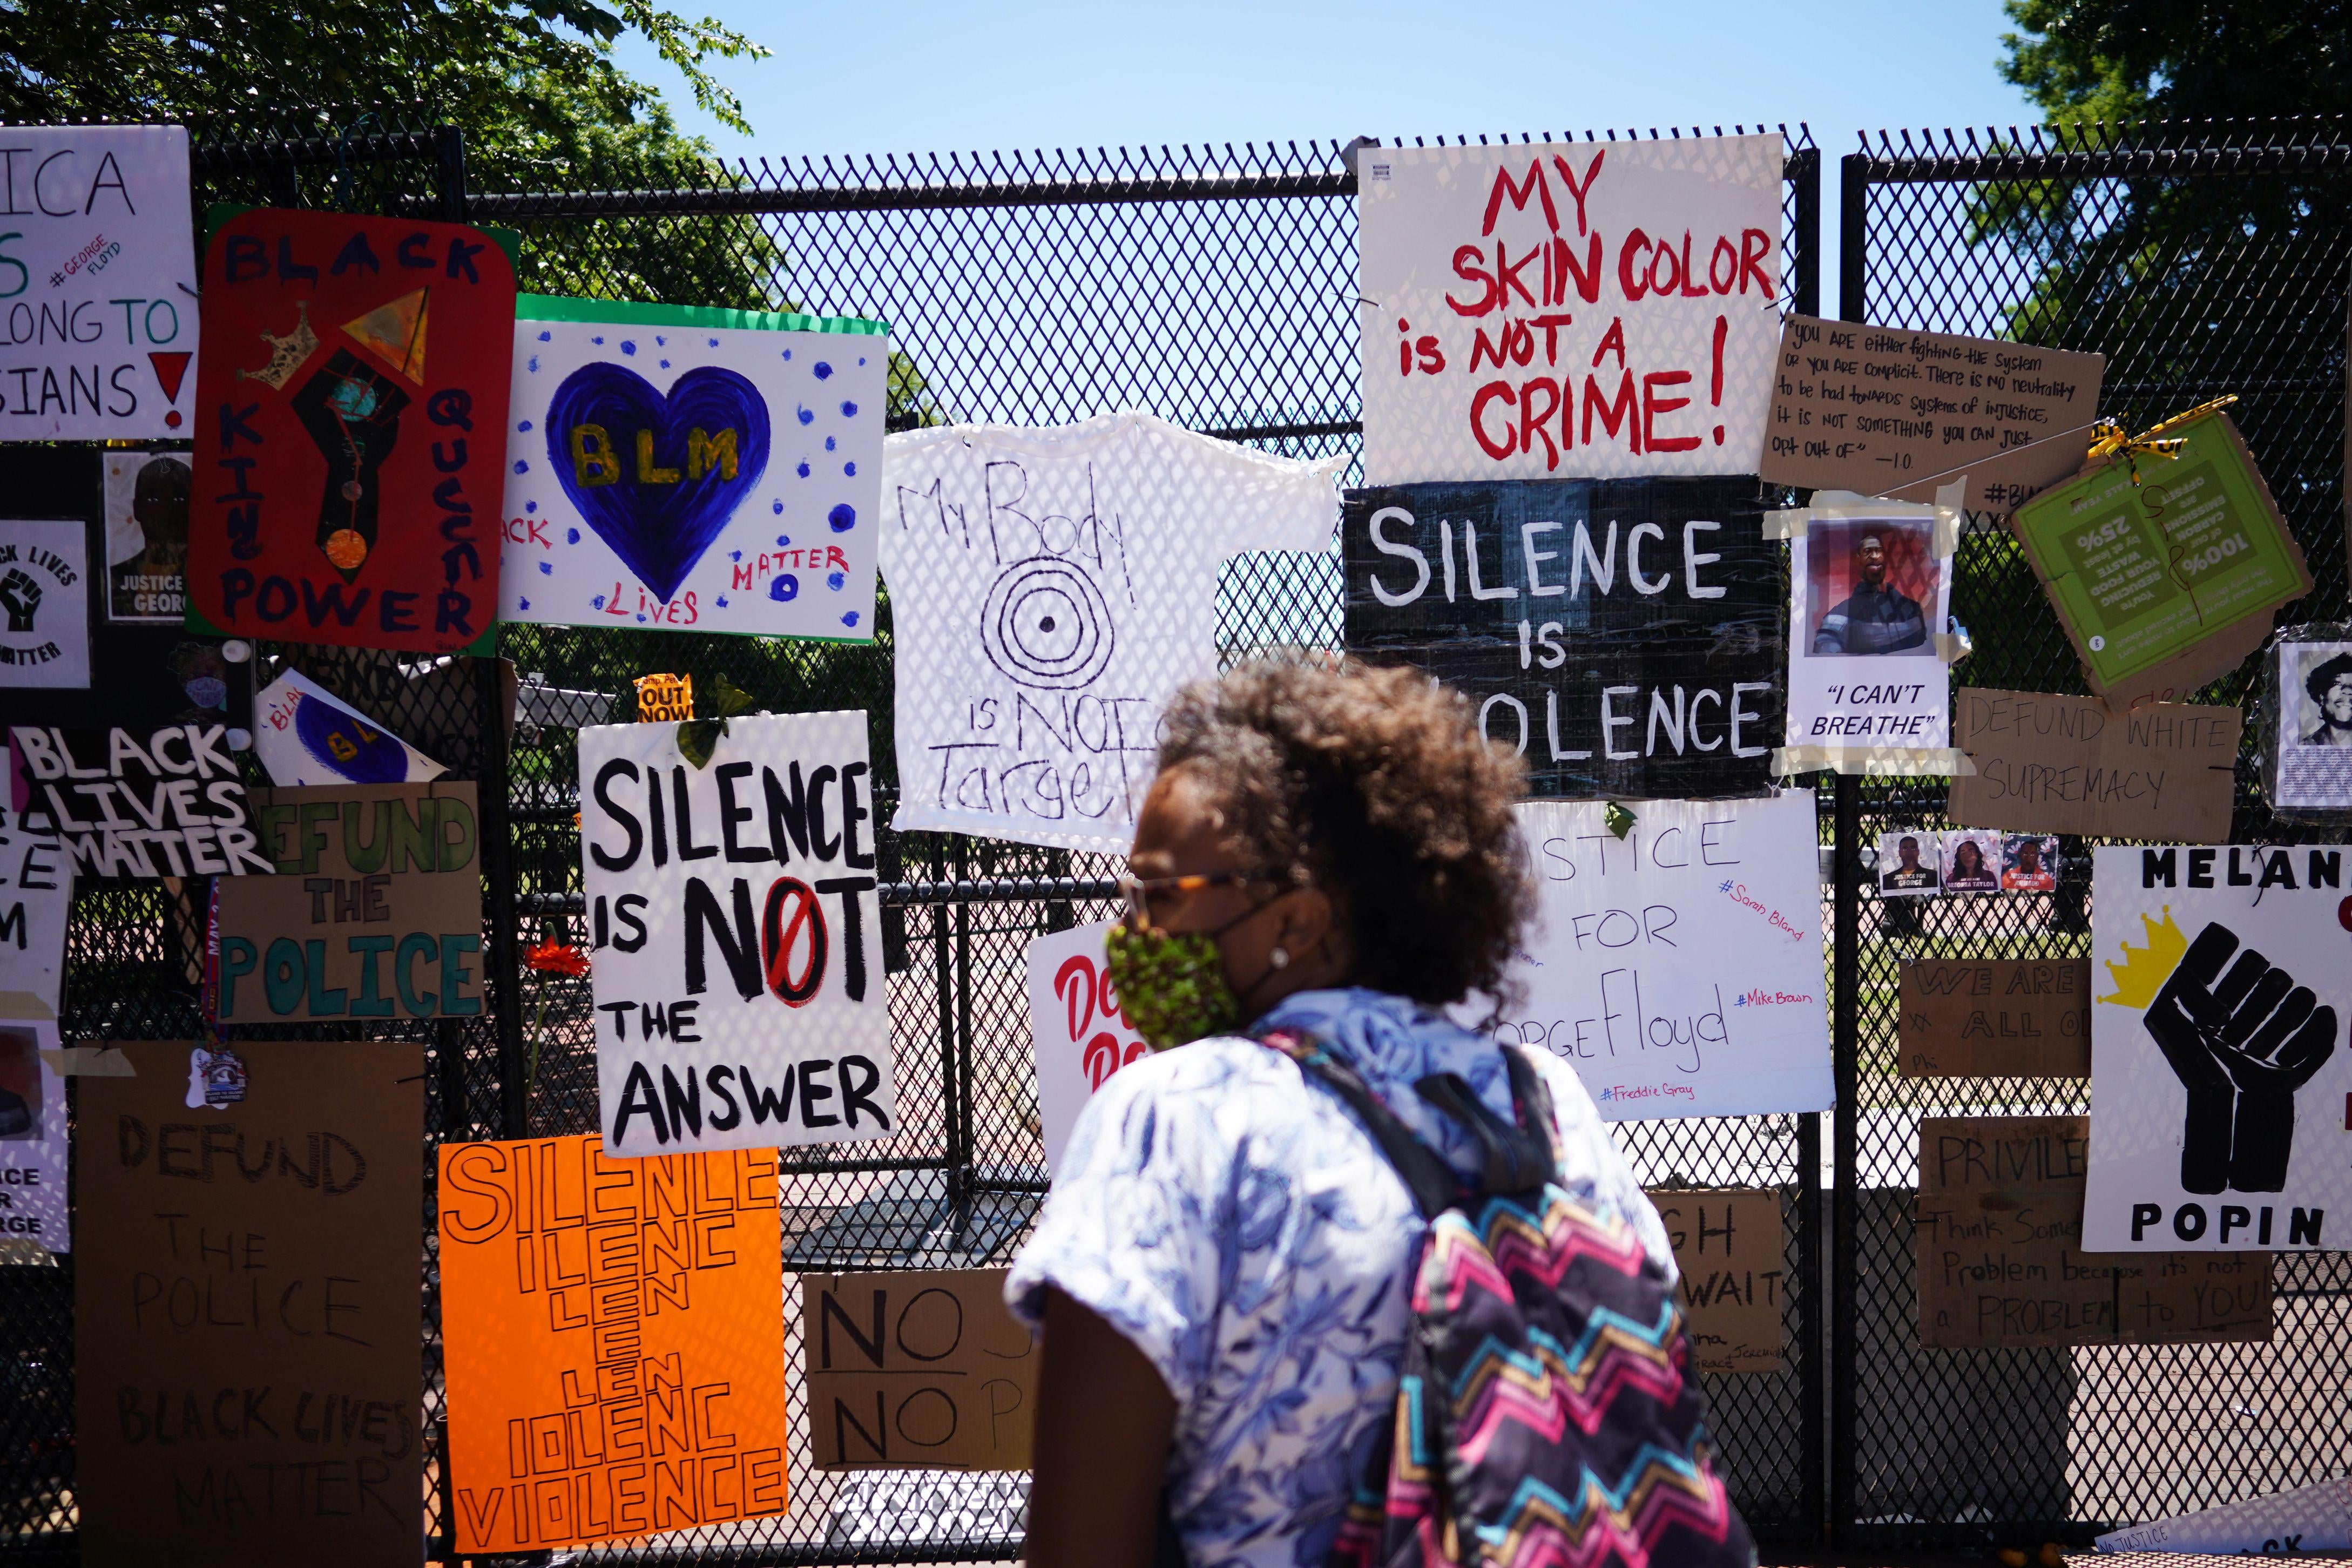 A woman stands in front of signs on the White House fence saying things like "Silence is not the answer."